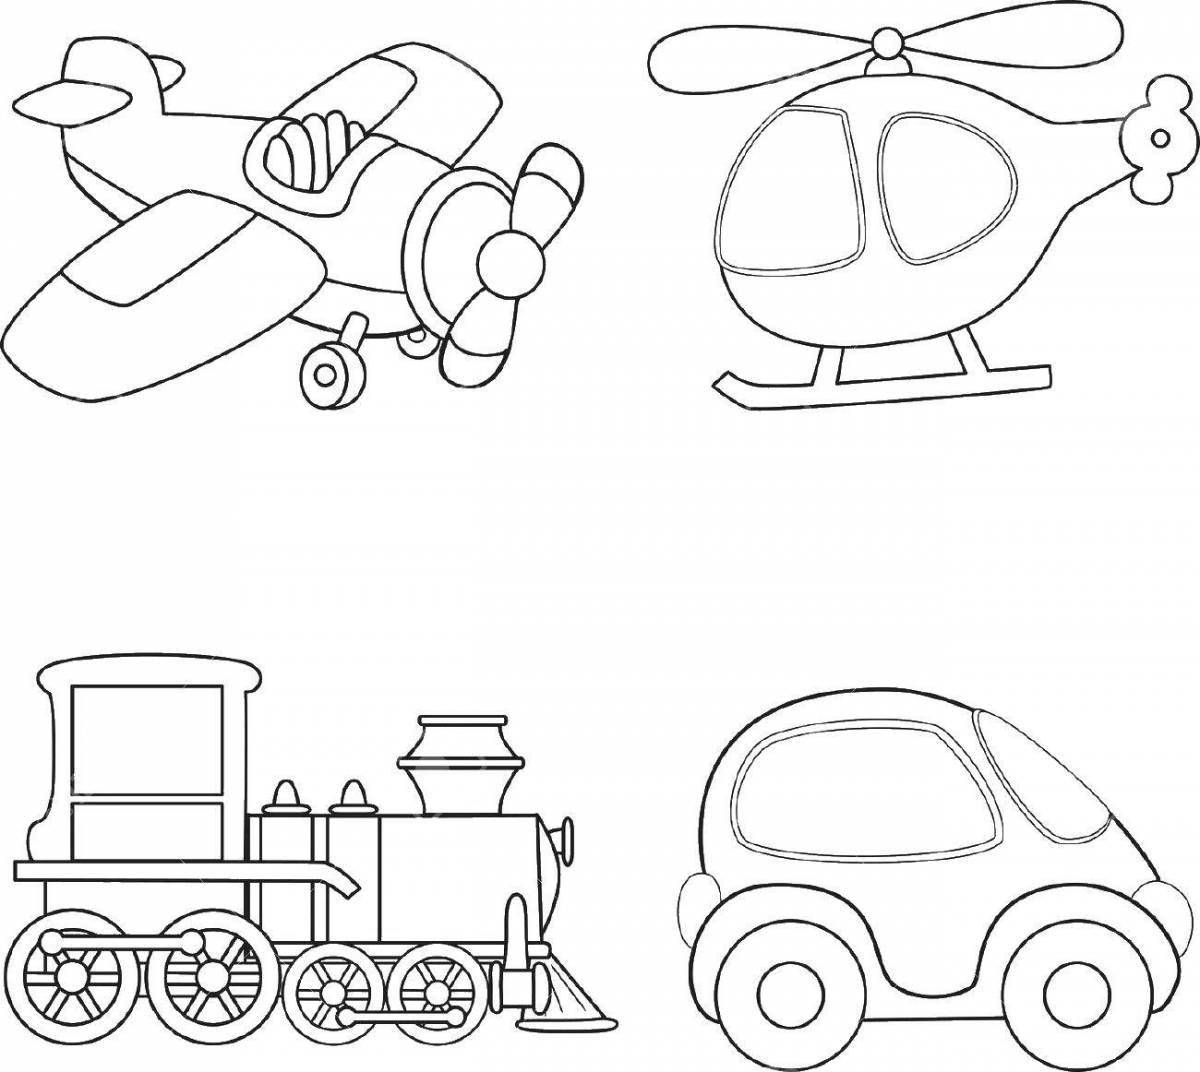 Exciting transport coloring for the senior group